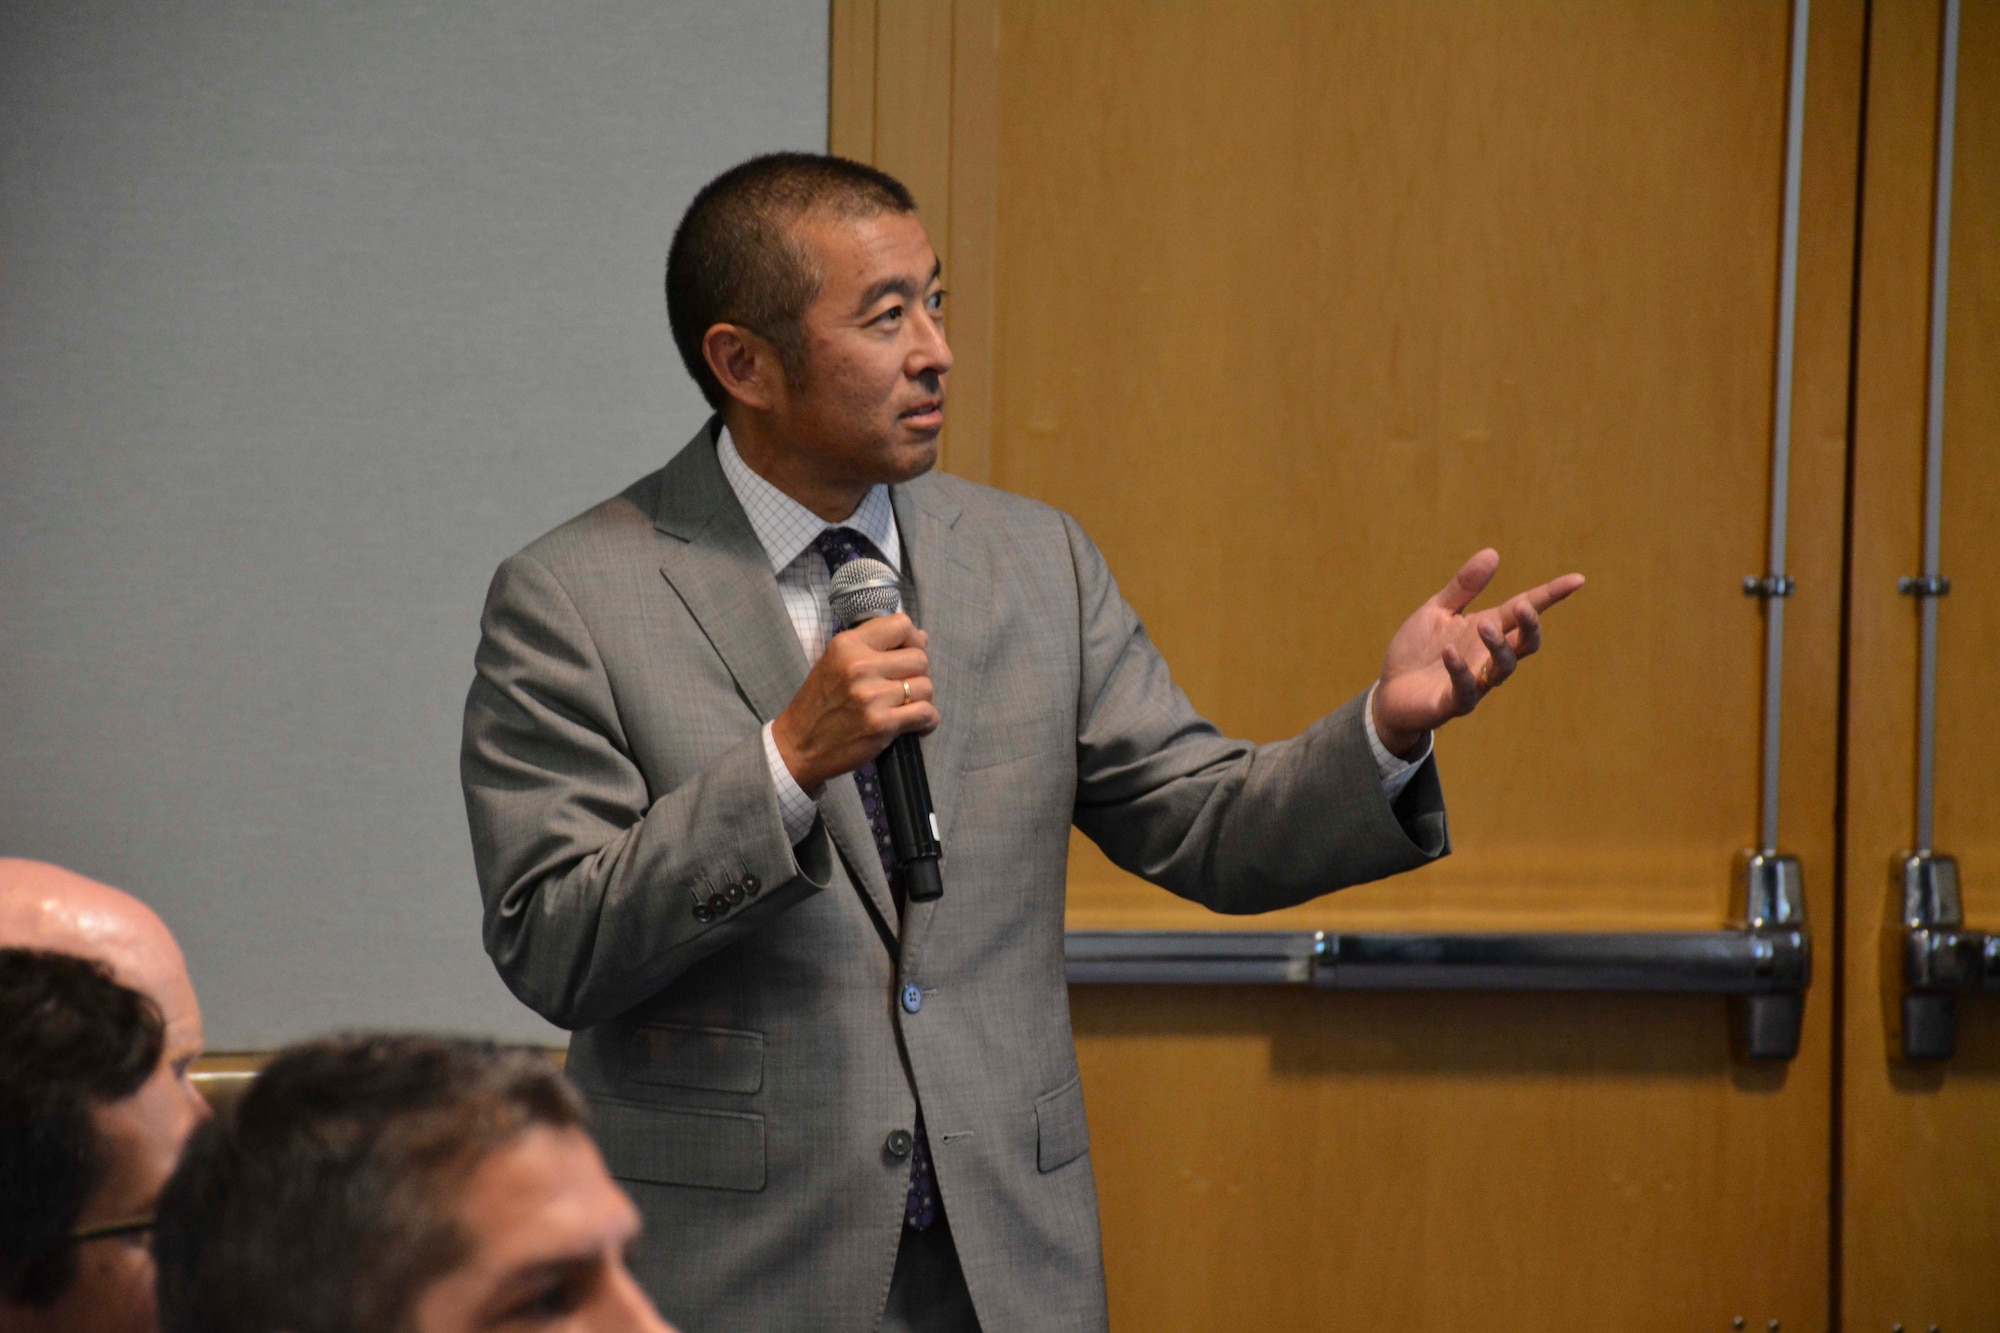 Edwin Oshiba, deputy director of civil engineers and deputy chief of staff for logistics, engineering, and force protection, briefs attendees of Air Force Day at Energy Exchange on Aug. 17, 2017.